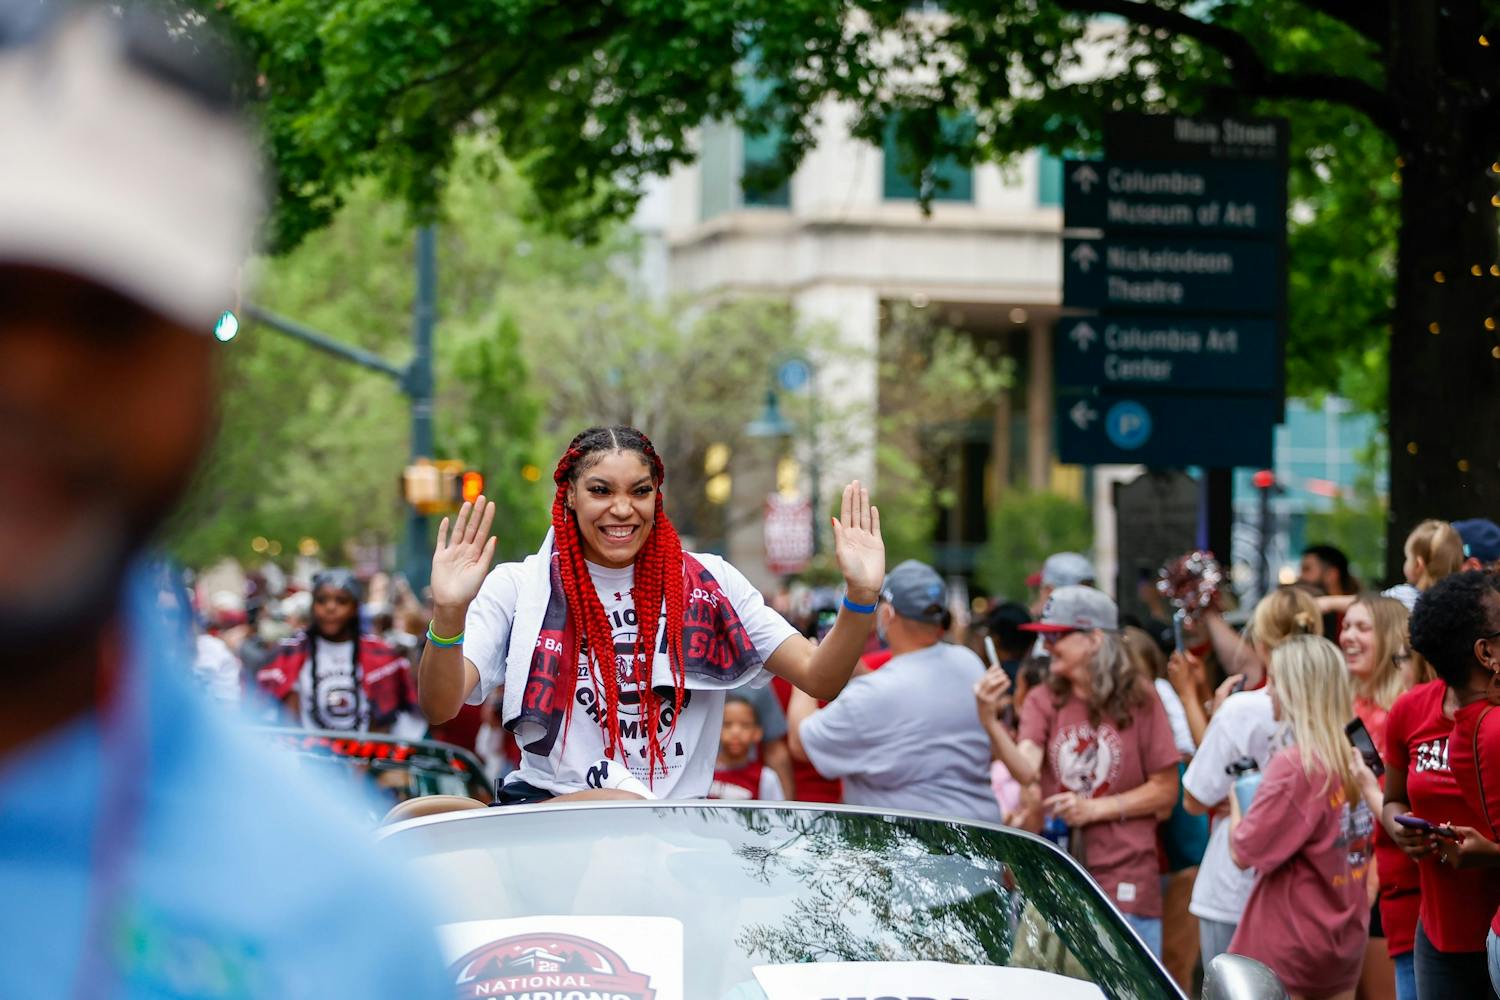 Senior forward Brea Beal waves from a car during a parade in honor of the Women’s Basketball team on April 13, 2022.&nbsp;